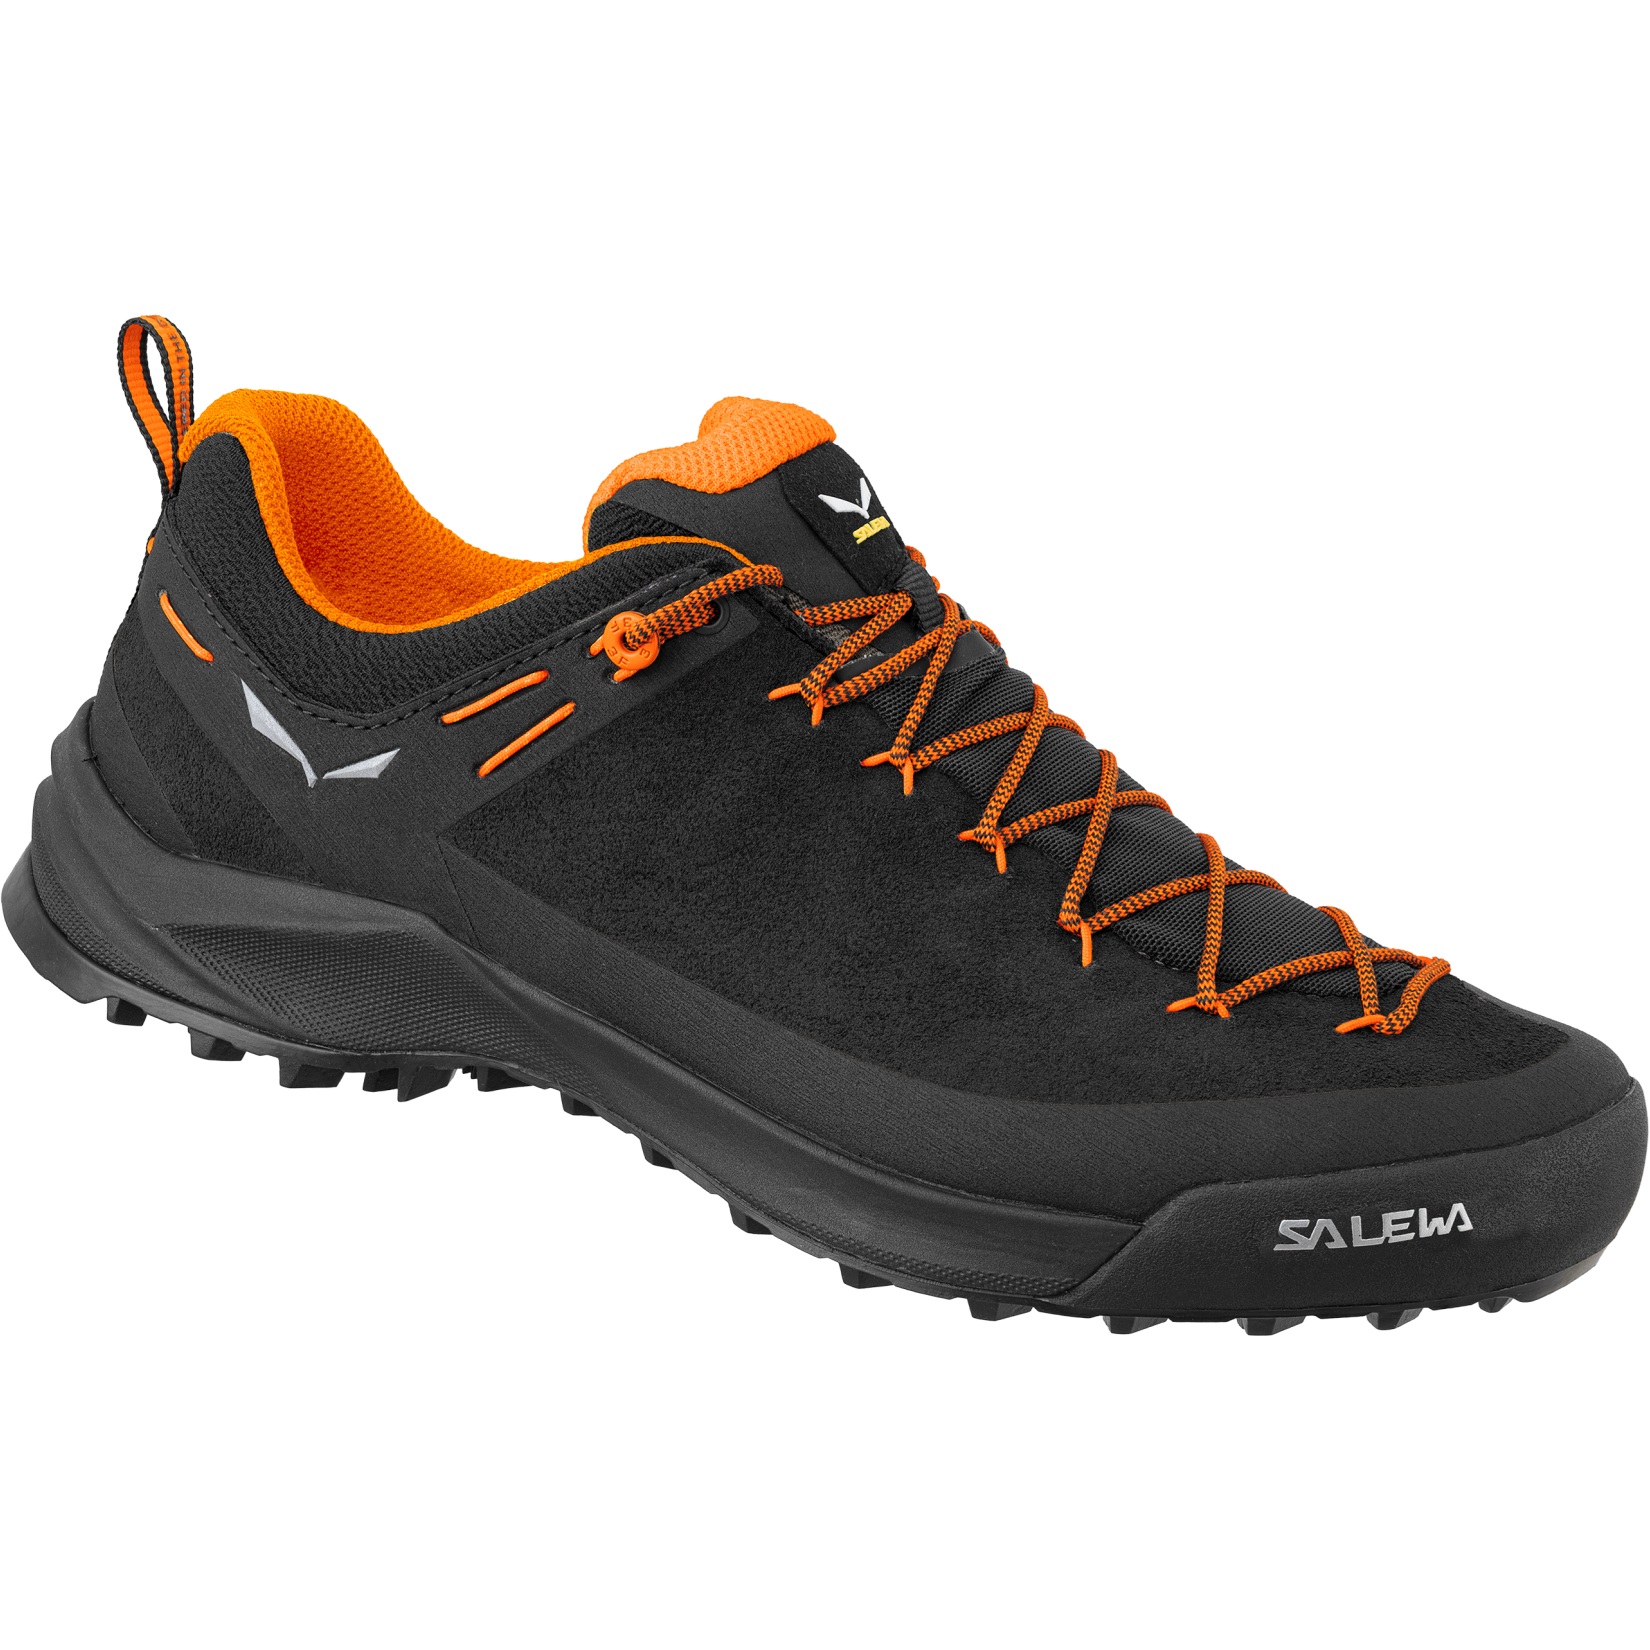 Picture of Salewa Wildfire Leather Approach Shoes - black/fluo orange 0938